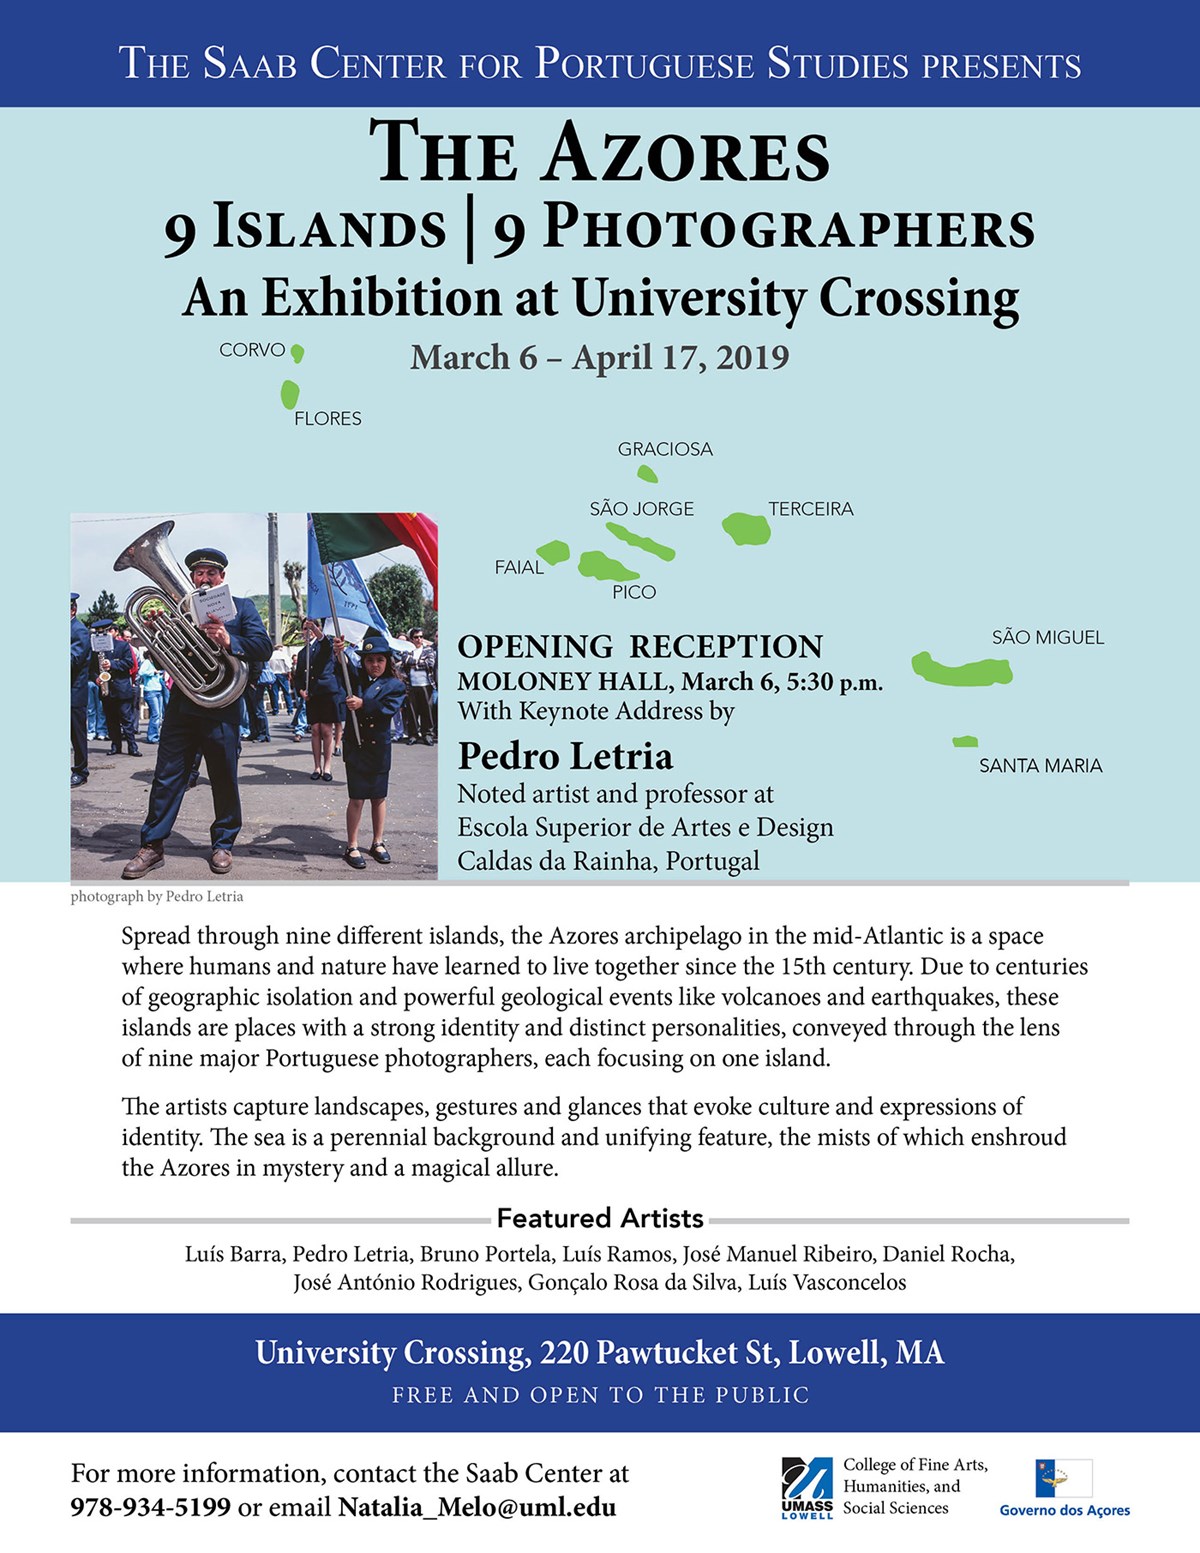 Poster for The Azores: 9 Islands | 9 Photographers An Exhibition at University Crossing at UMass Lowell March 6 - April 17, 2019. Opening Reception on Wednesday, March 6, 2019 at 5:30 p.m. at UMass Lowell's Moloney Hall at University Crossing.